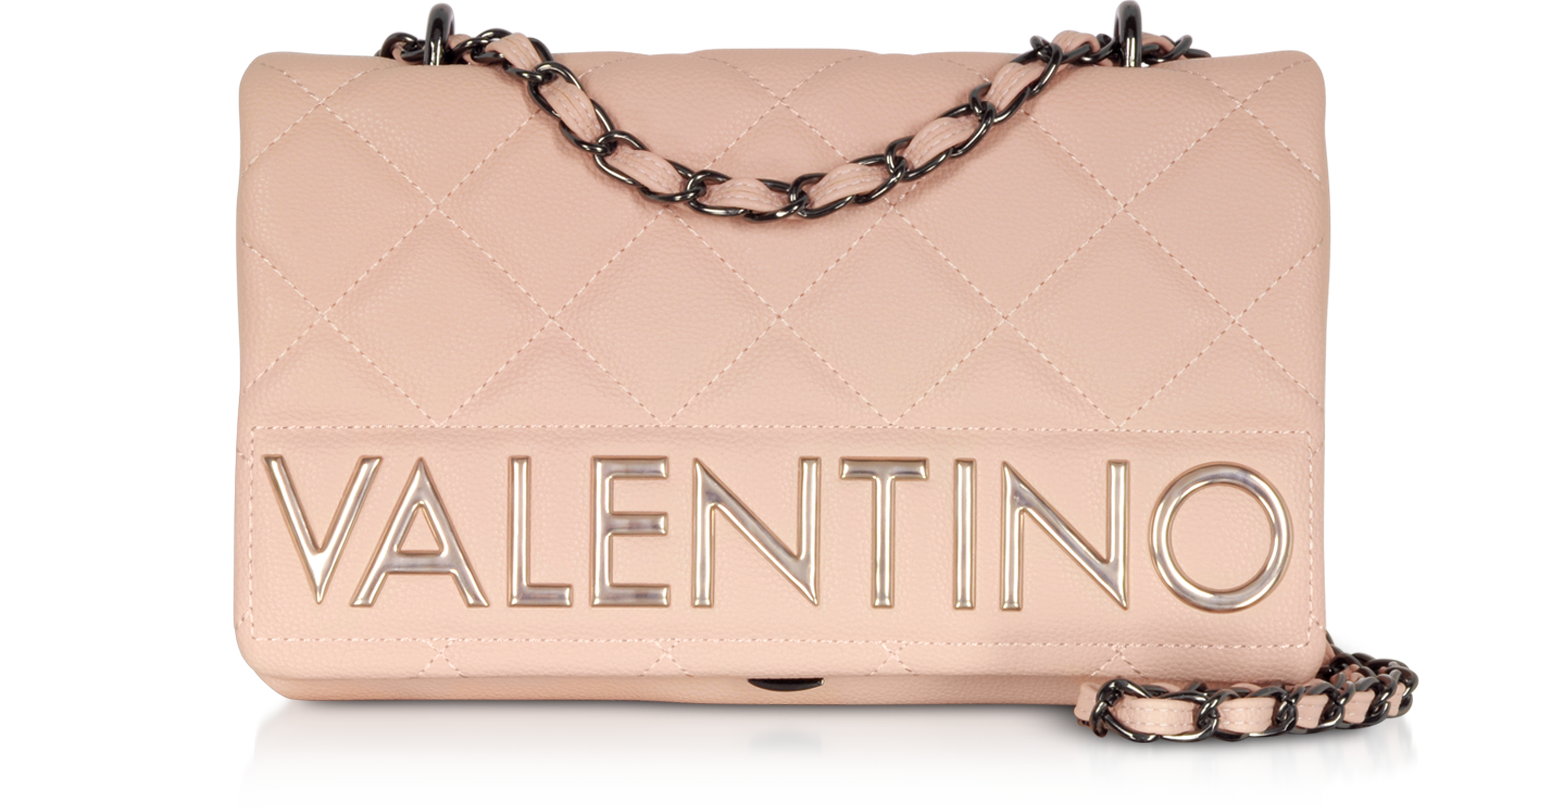 Mario Valentino Embossed Quilted Vaty03 Shoulder Bag